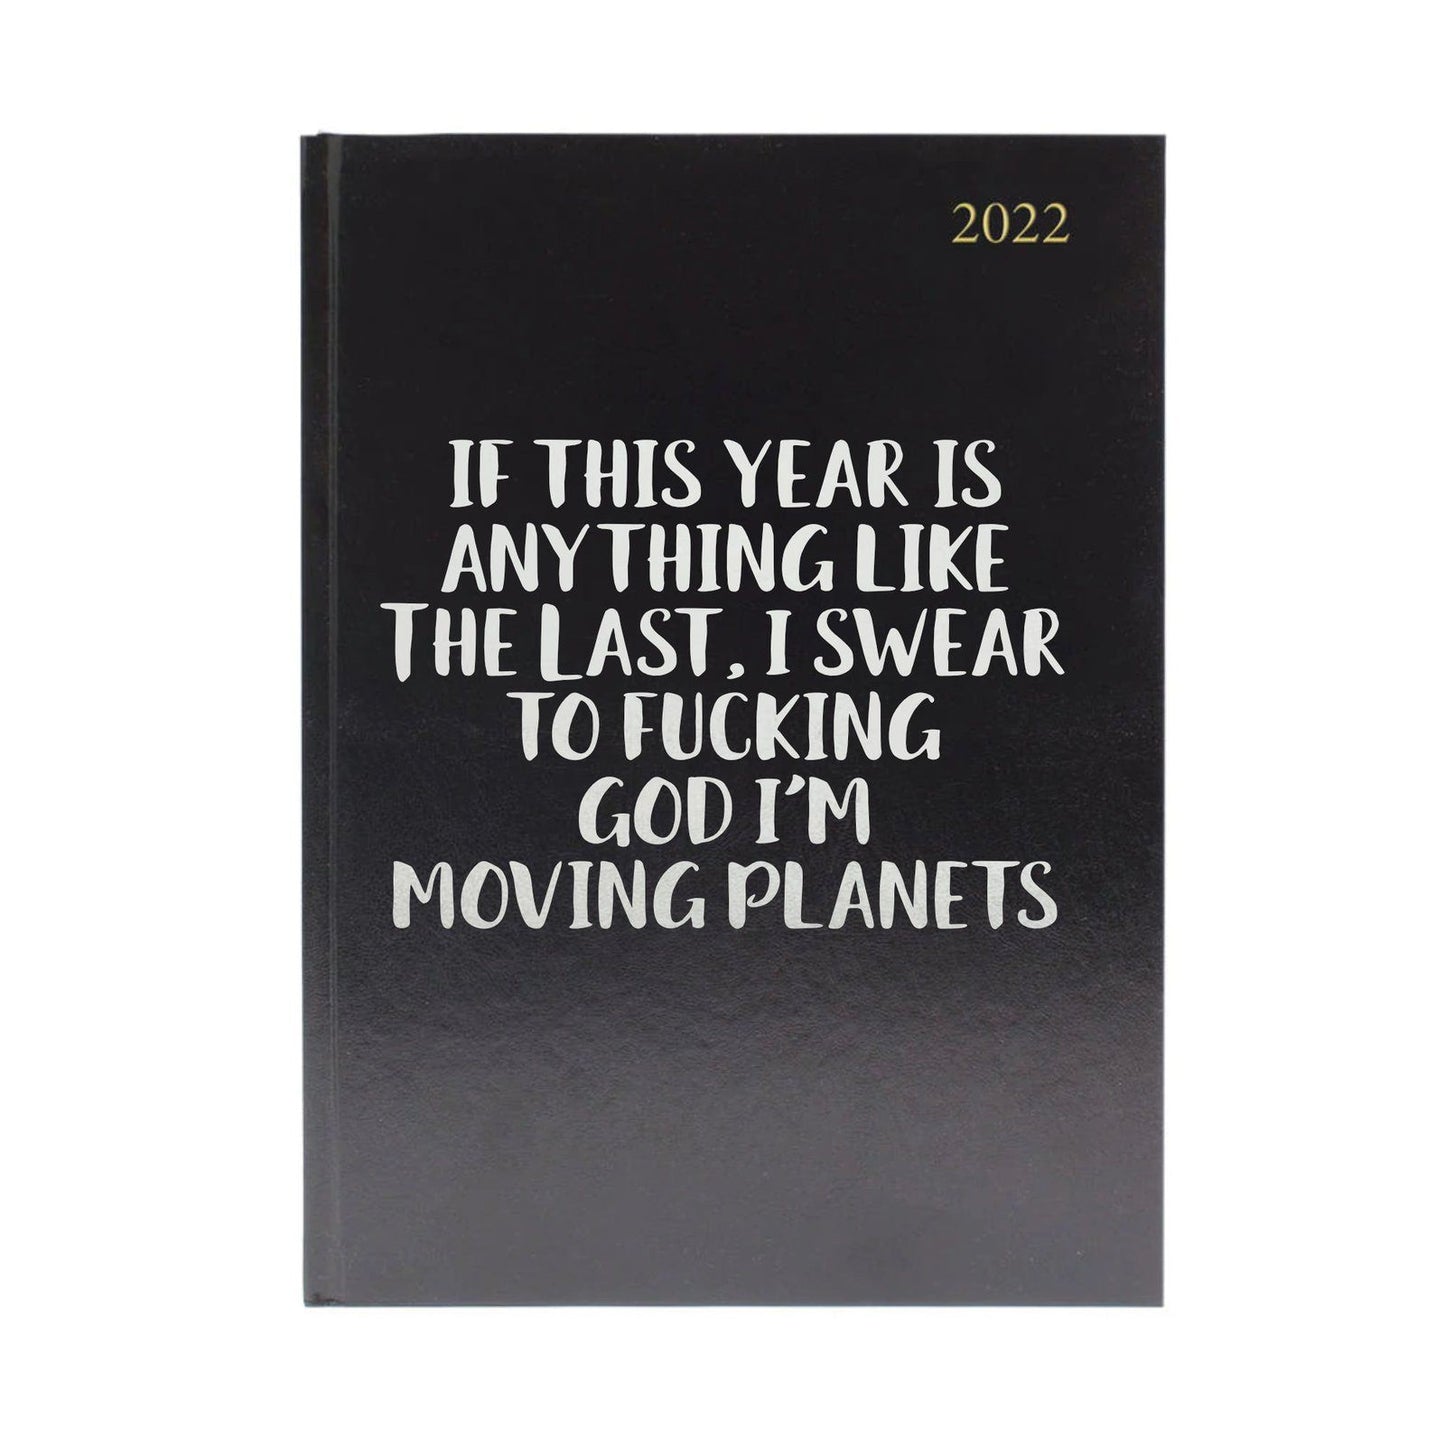 2022 Diary - If this year is anything like the last, I swear to fucking god I'm moving planets - A5 | Leather effect | Yearly Book | Weekly pages | Direct print to book | 2022 is gold foil